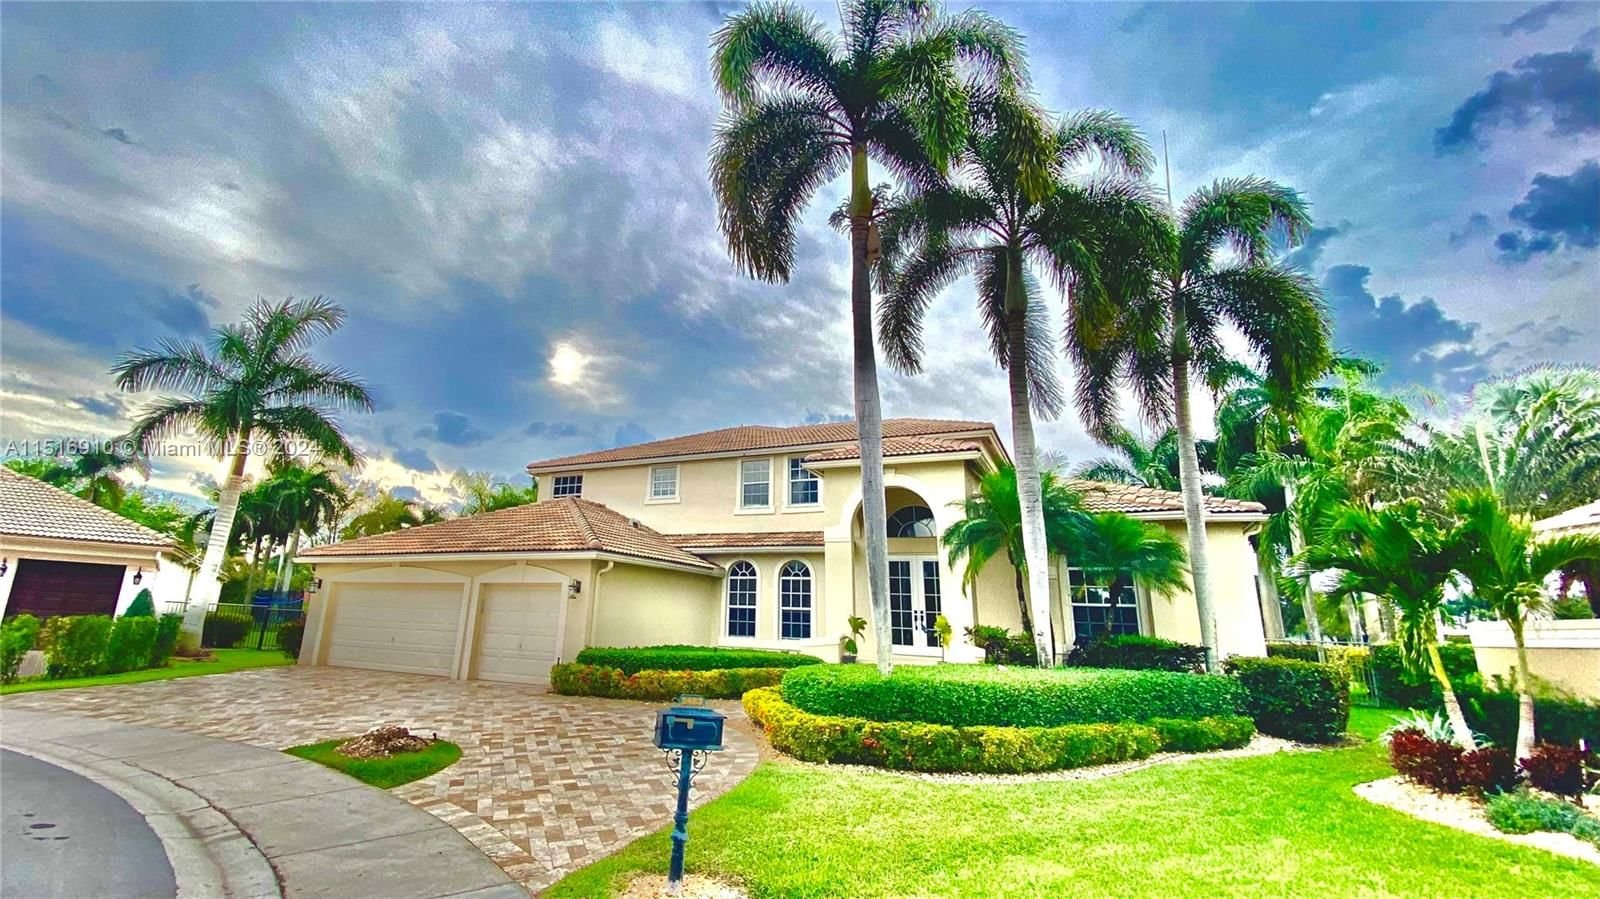 Real estate property located at 2463 Eagle Run Dr, Broward County, SECTOR 7 - PARCELS F G H, Weston, FL